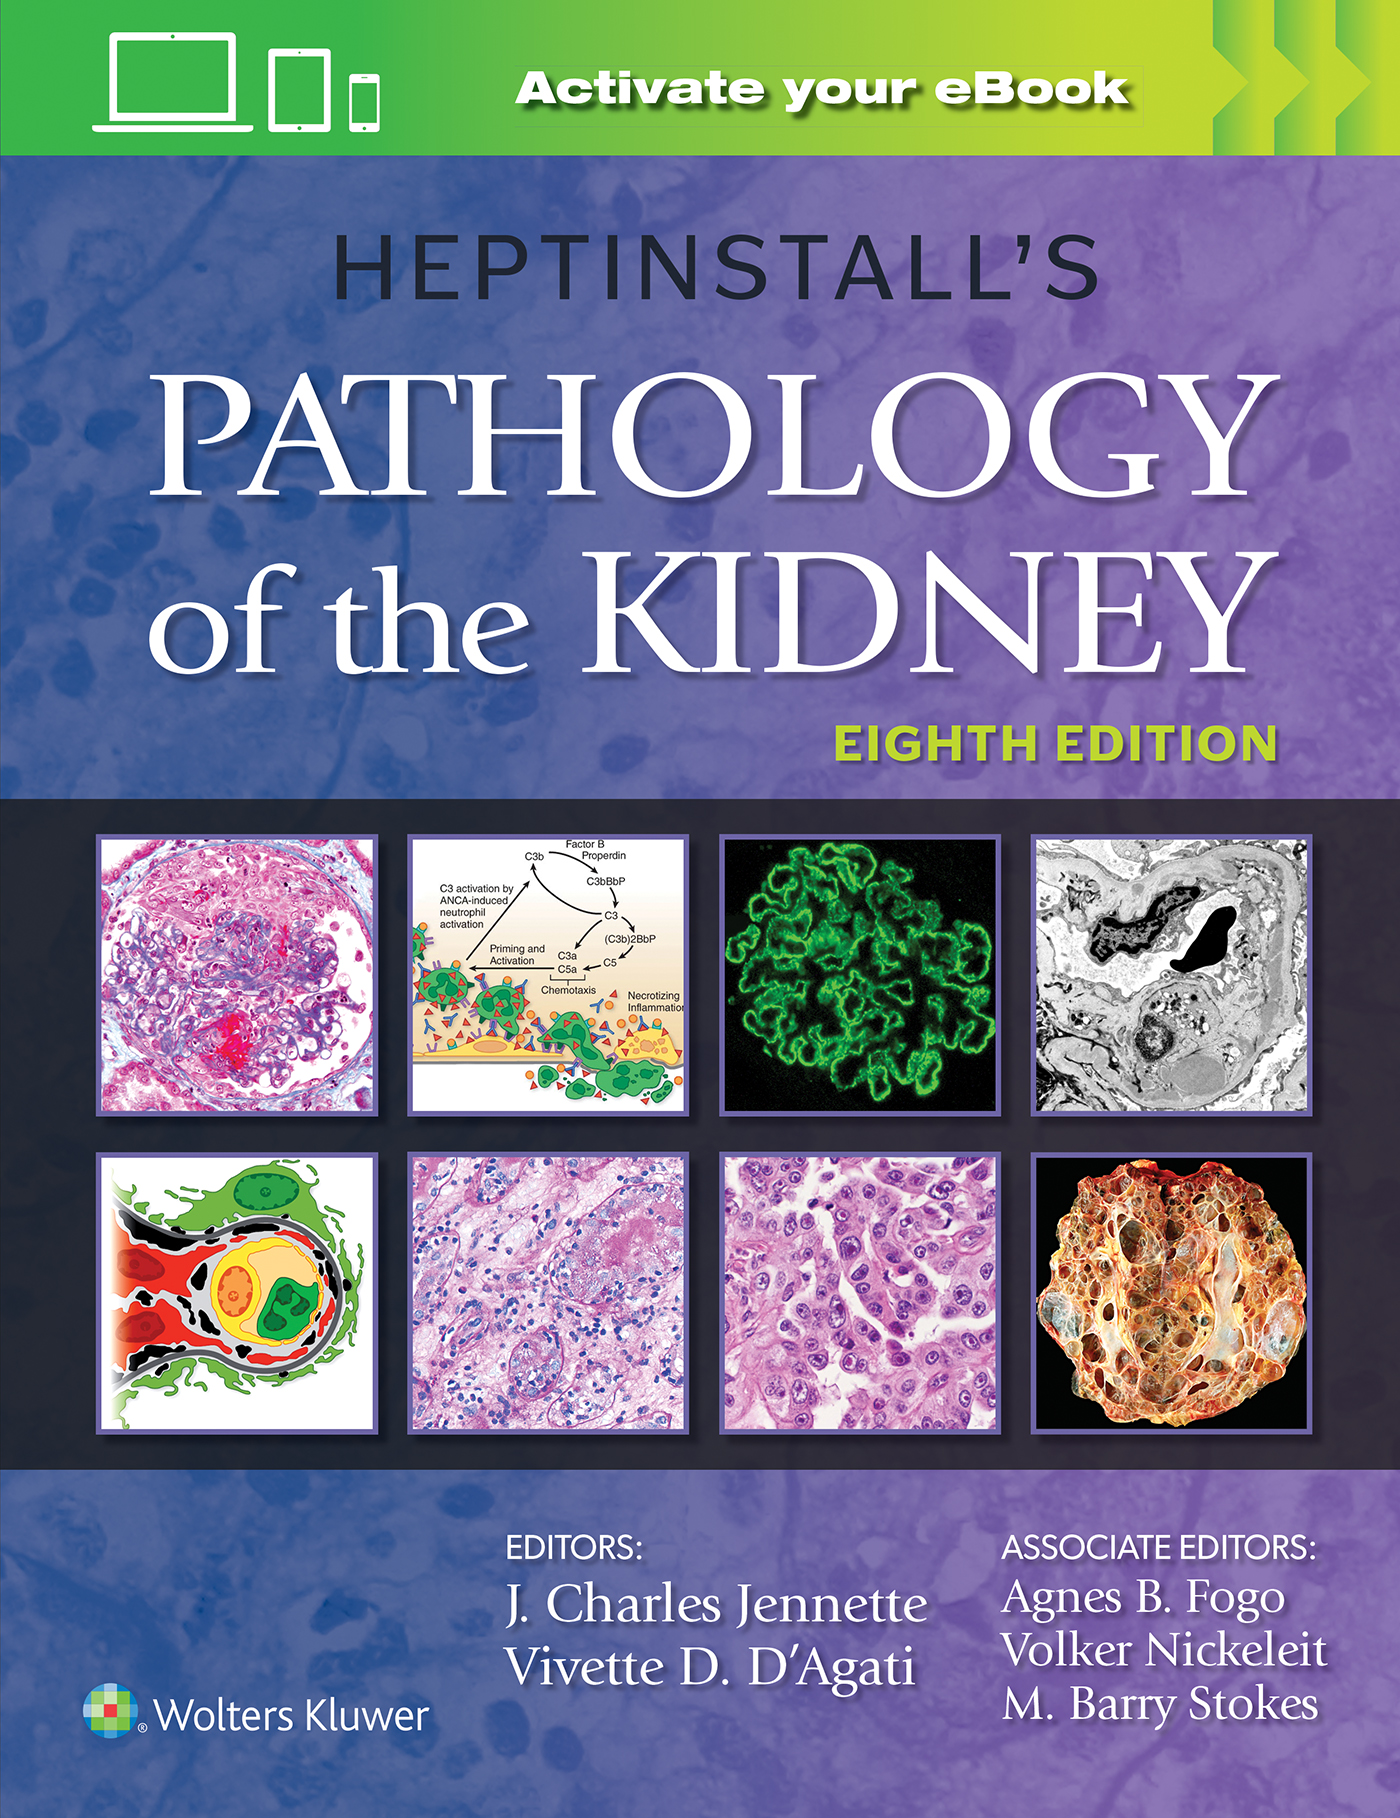 Heptinstall's Pathology of the Kidney, 8th ed.